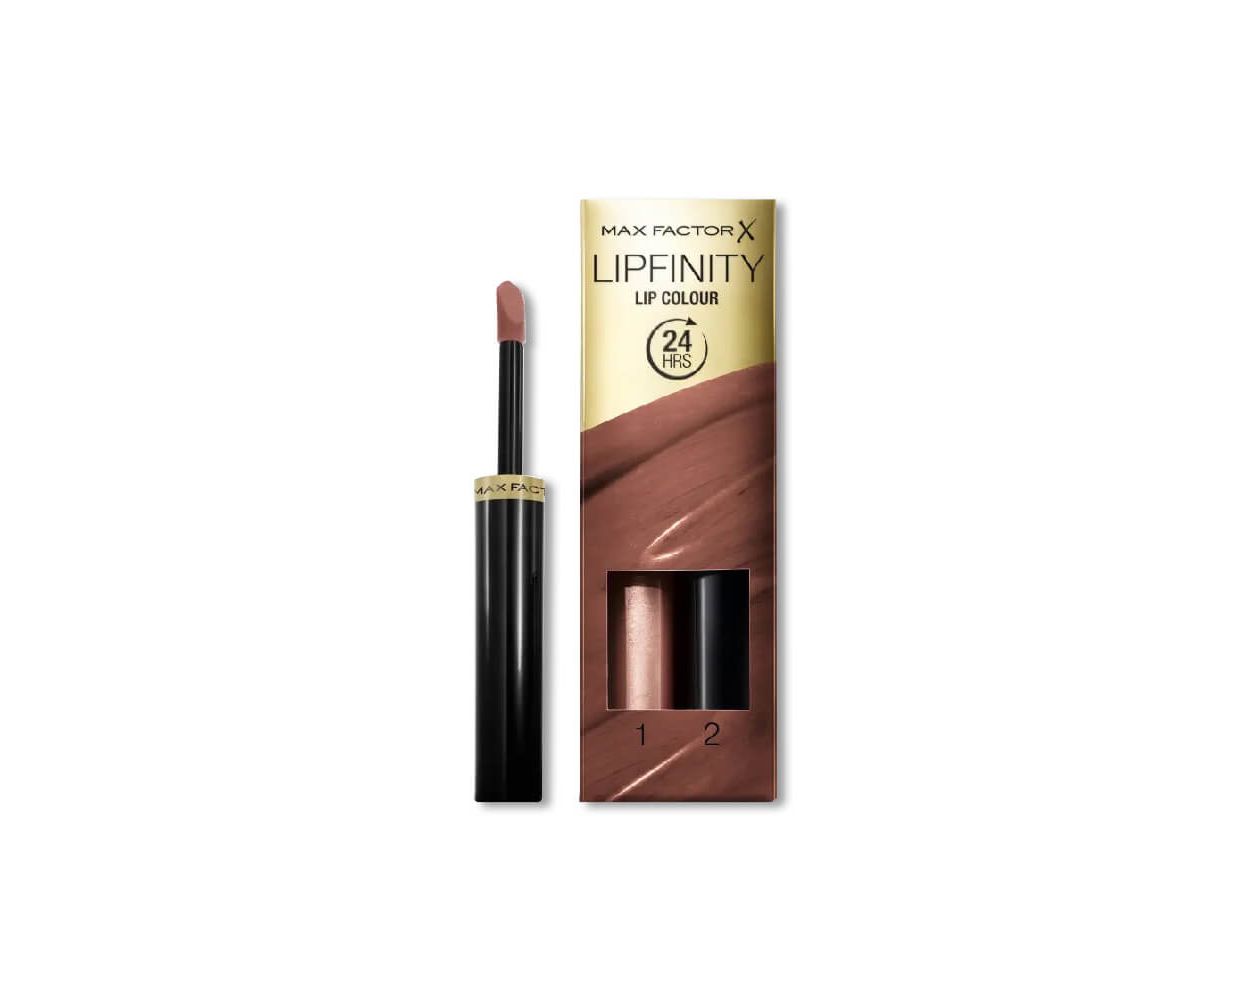 Maxfactor Lipfinity Lip Colour Lipstick 2Step Long Lasting - 200 Cafinated 2.3Ml + 1.9 G - AllurebeautypkMaxfactor Lipfinity Lip Colour Lipstick 2Step Long Lasting - 200 Cafinated 2.3Ml + 1.9 G